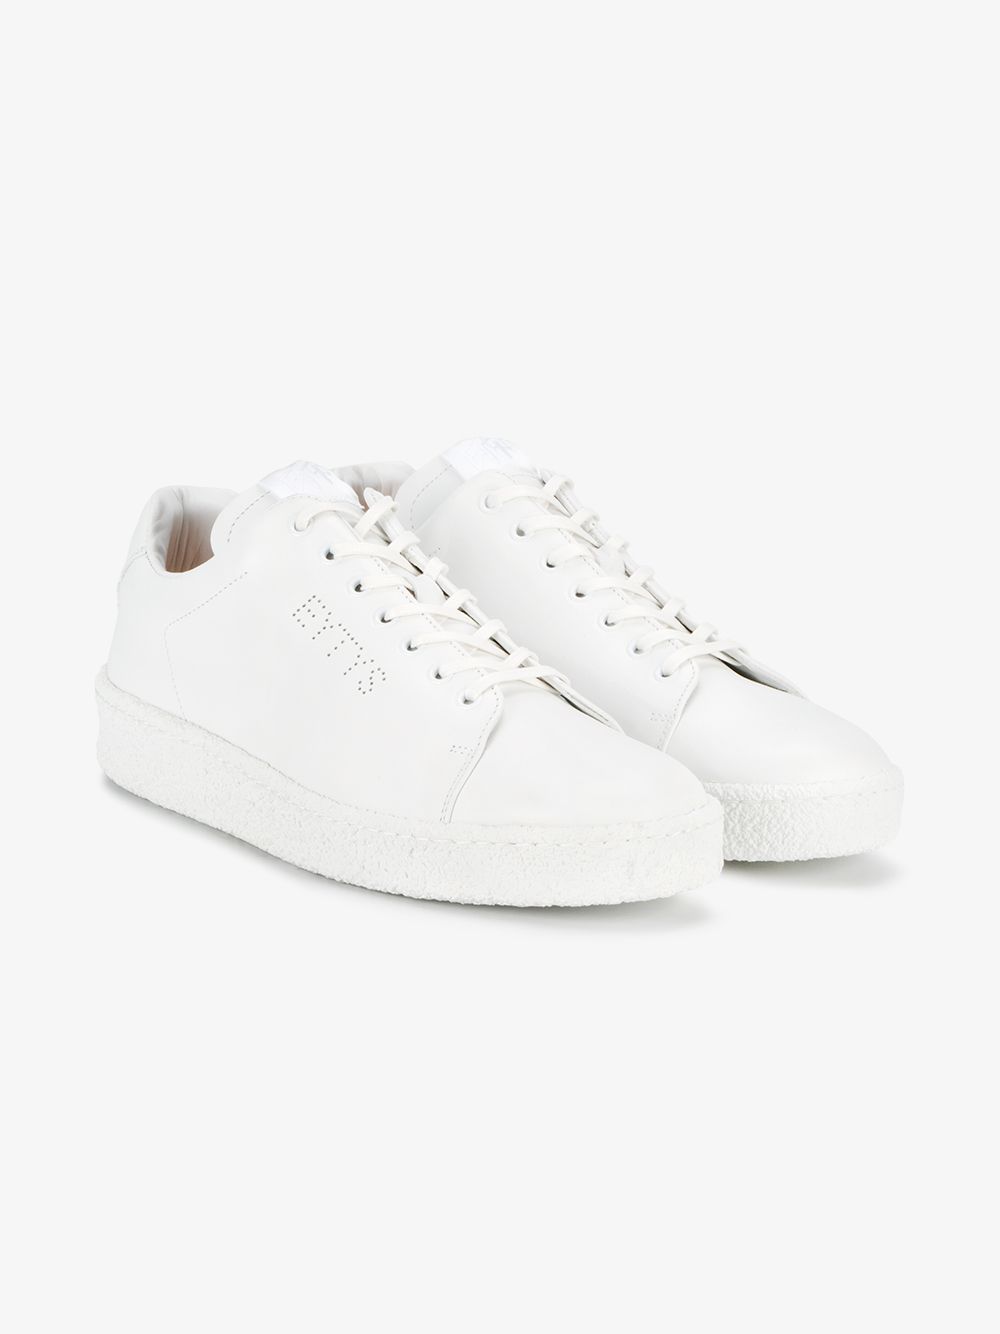 Eytys White Leather Ace Sneakers | Browns Fashion